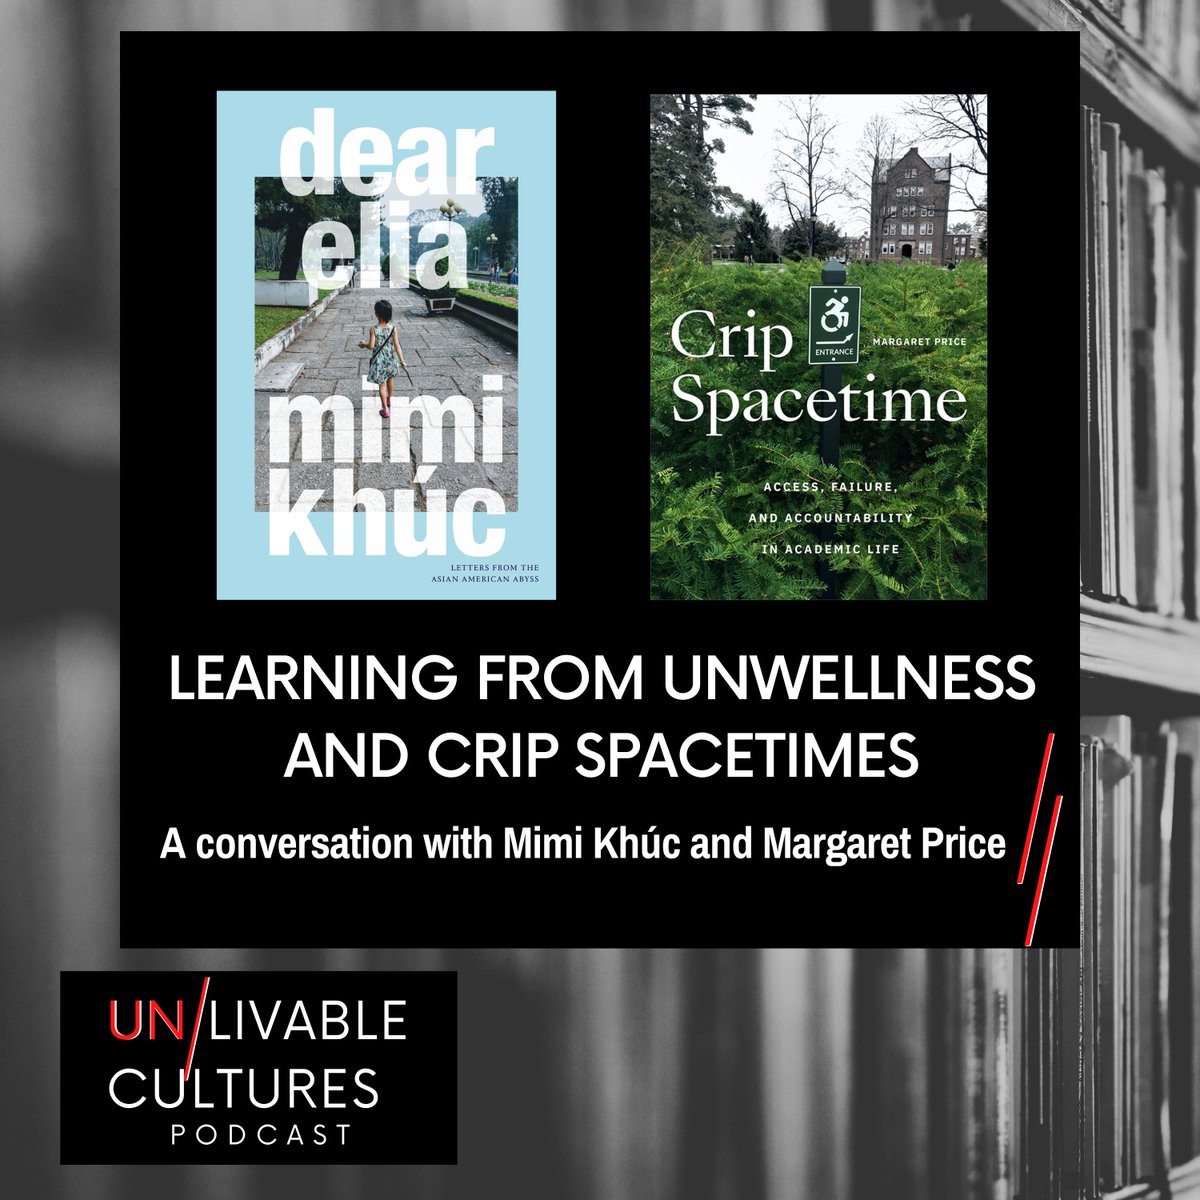 My conversation with @PriceMargaret and @mimikhuc about their new books 'Crip Spacetime' and 'dear elia' (both from @DukePress) is now live from @UnlivablePod! Interview audio: open.spotify.com/episode/7ax6PB… Interview transcript: docs.google.com/document/d/1oP…